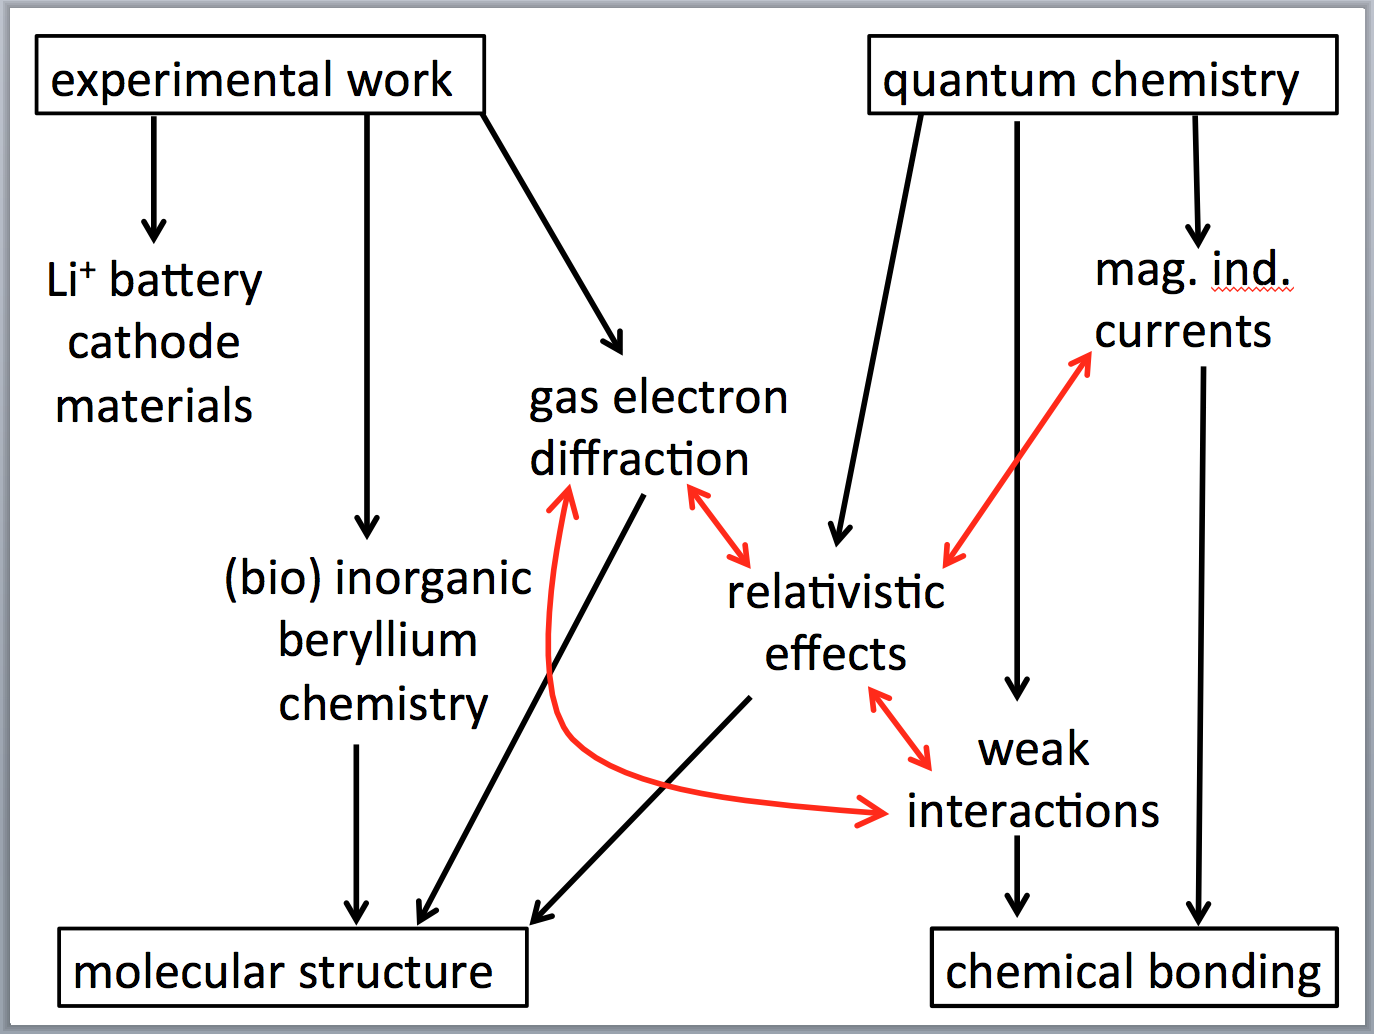 diagramm of interconnections of scientific interests and projects